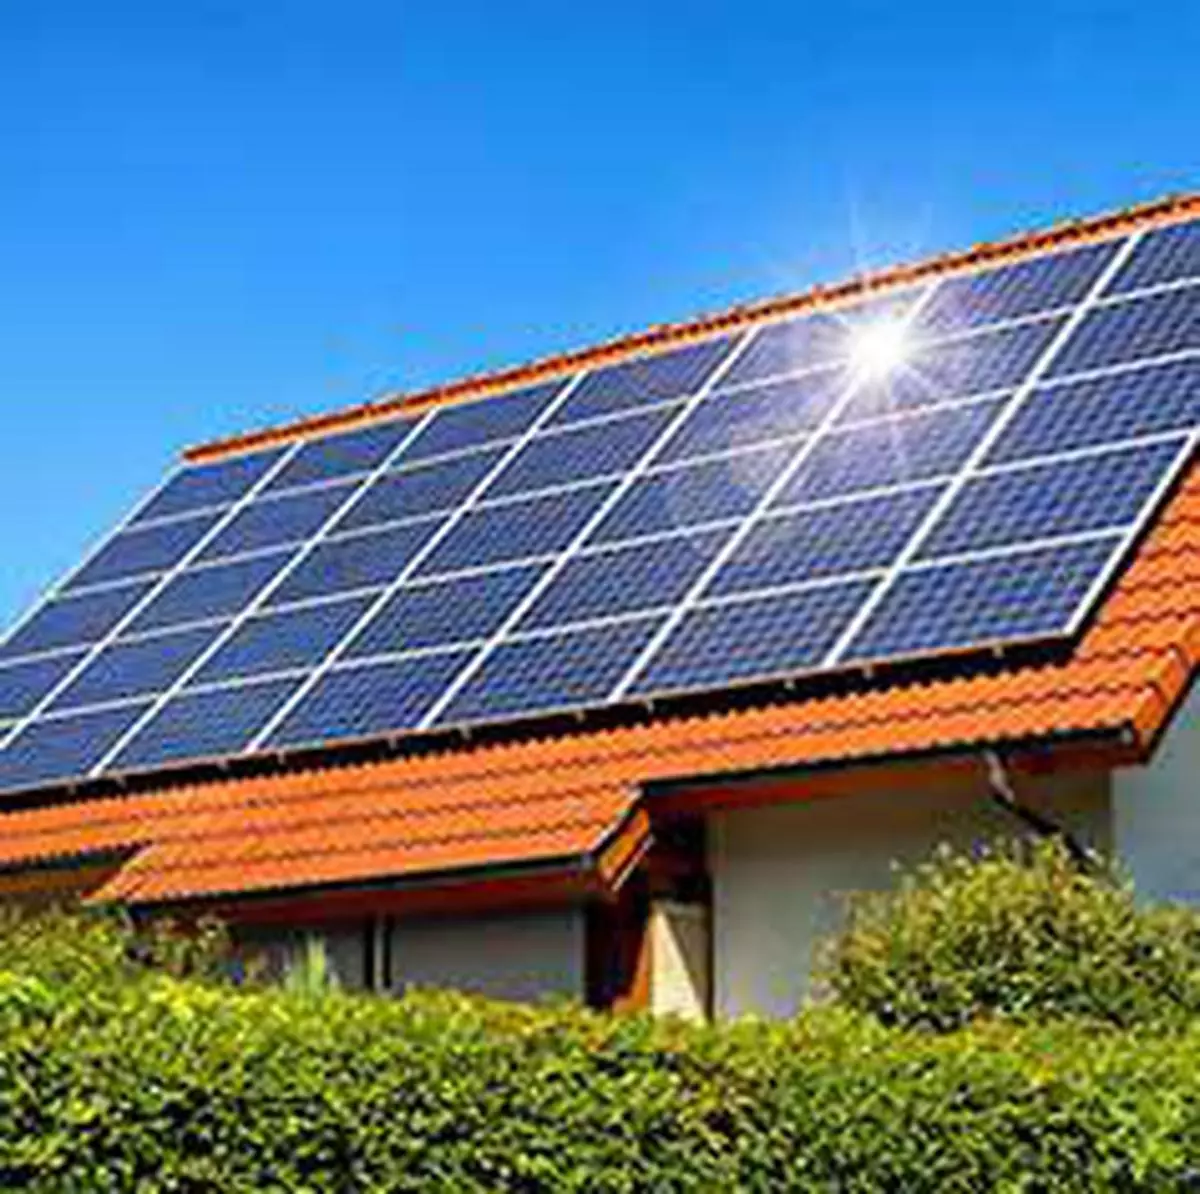 Rooftop solar promises considerable annual cost savings on their electricity bills in the residential segment